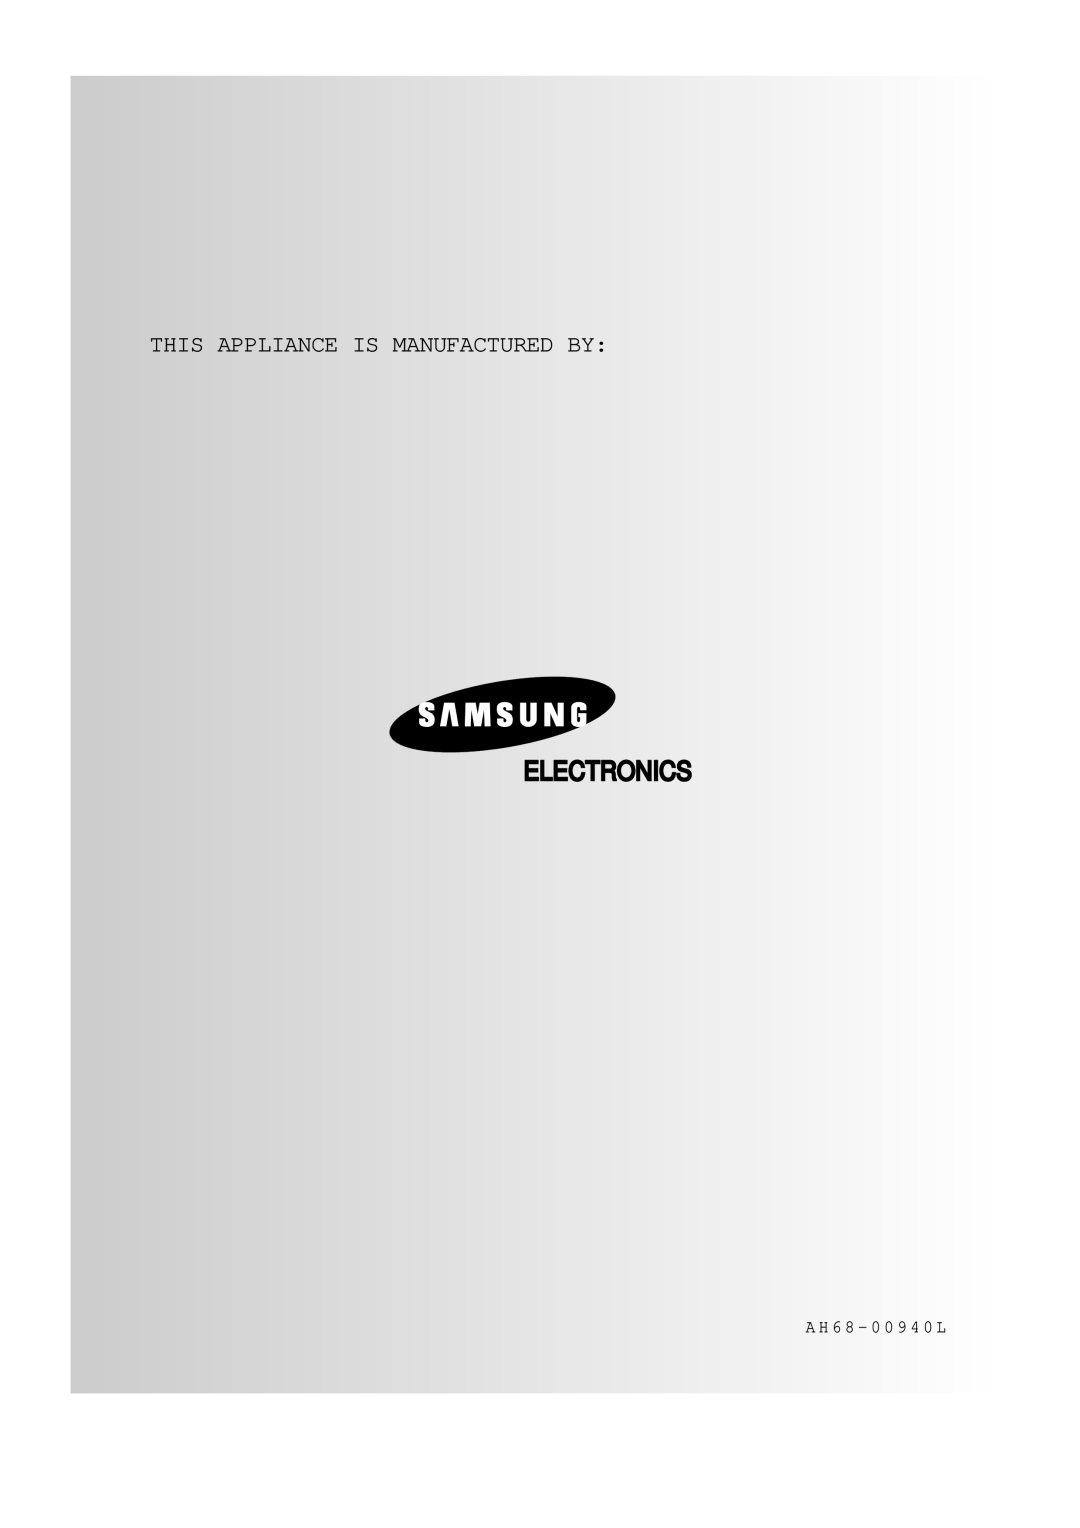 Samsung MAX-VL85 instruction manual Electronics, This Appliance Is Manufactured By, A H 6 8 - 0 0 9 4 0 L 